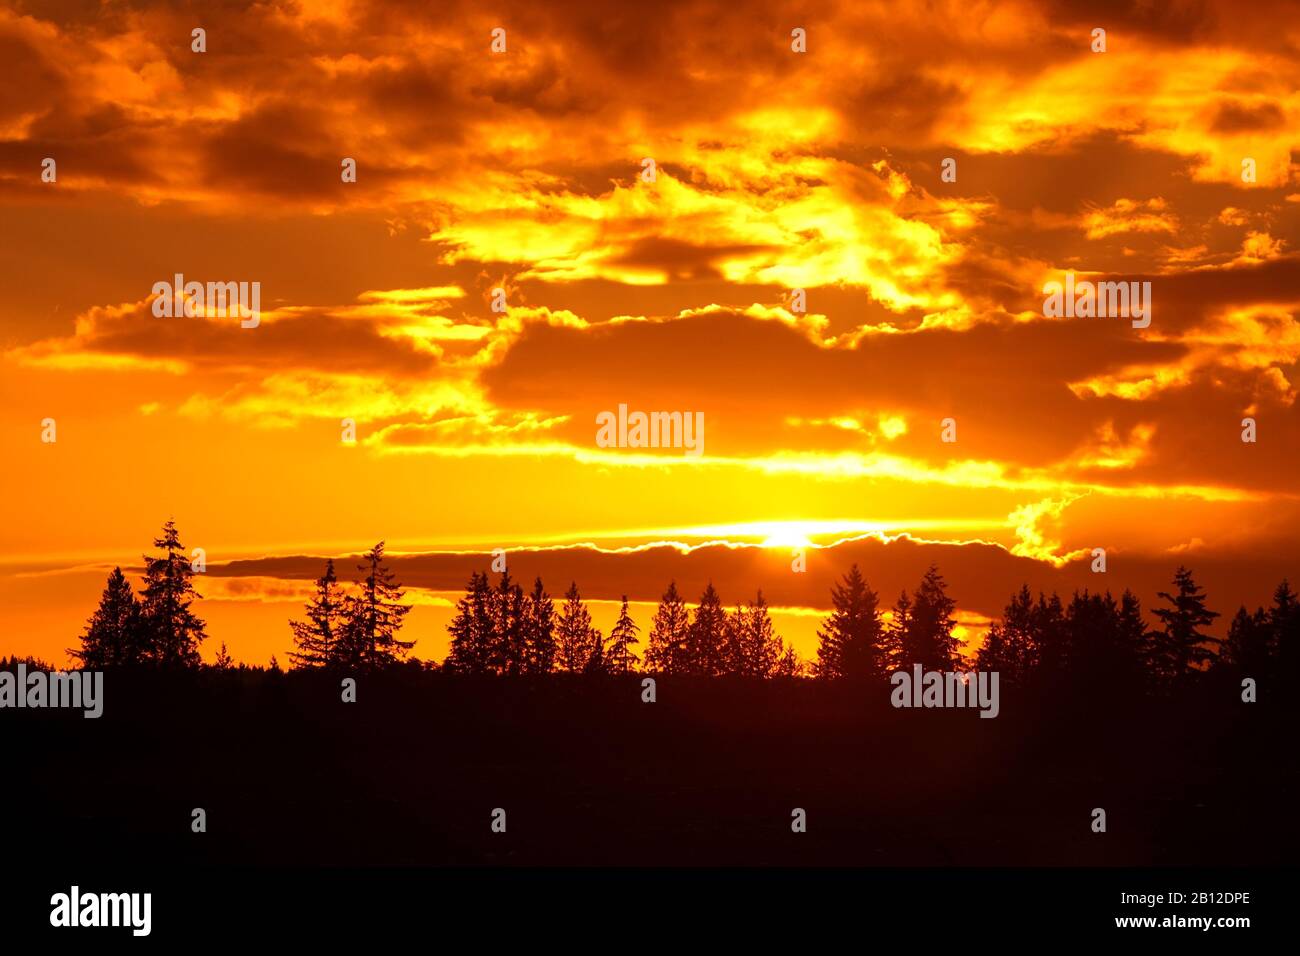 Panoramic sunset landscape with trees. Stock Photo